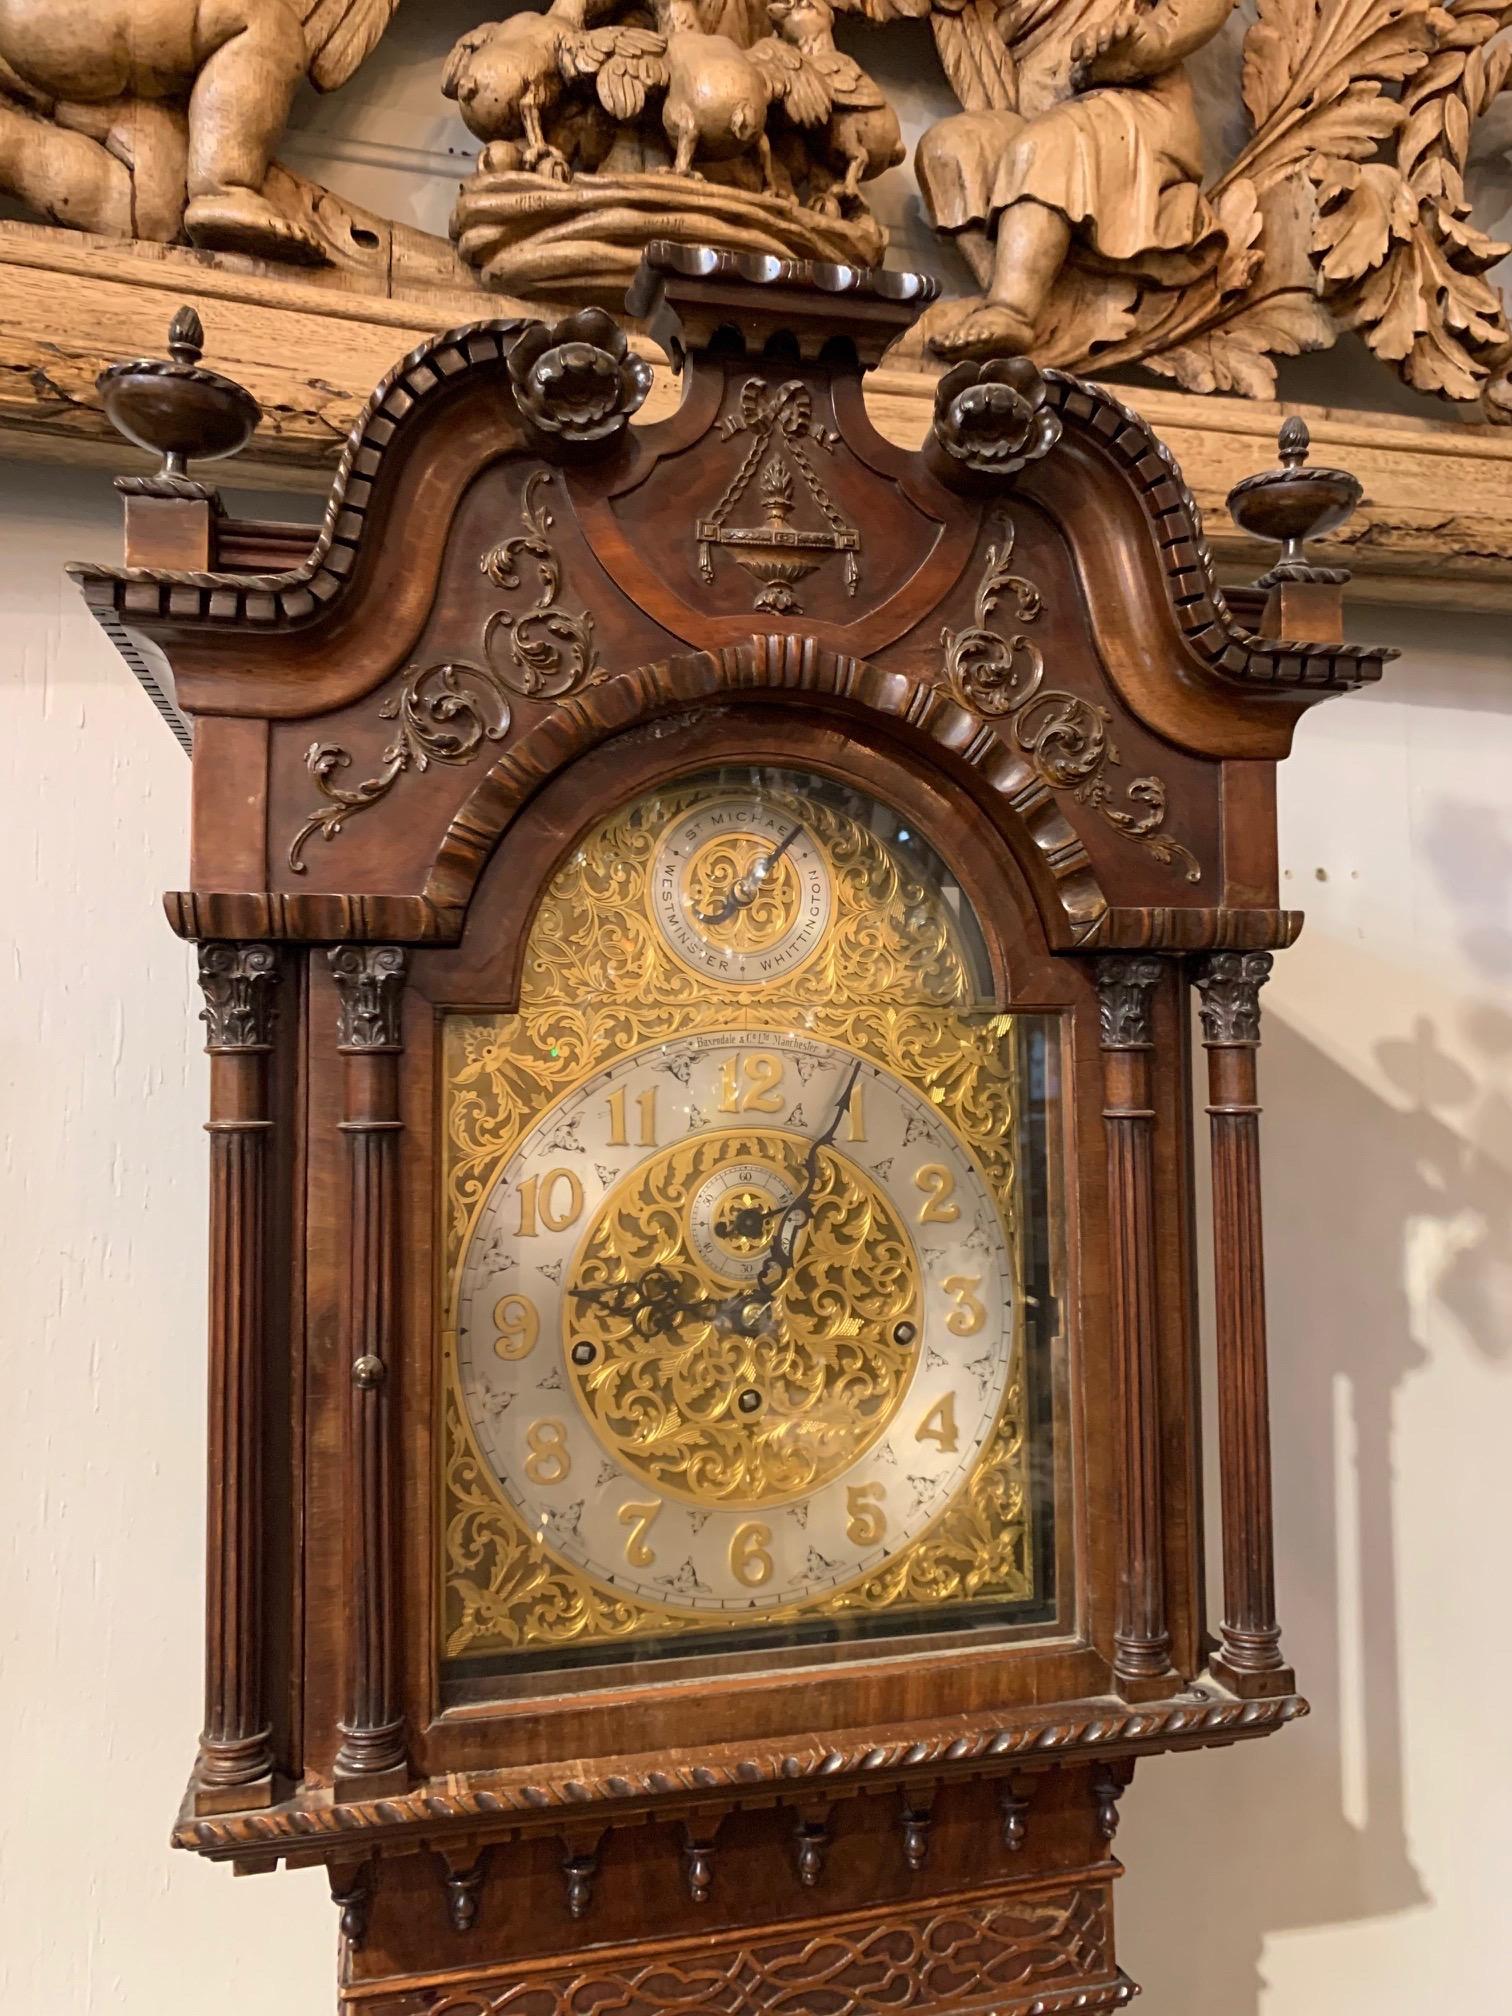 Very fine 19th century English Chippendale long case grandfather clock by Baxondale and Company, Manchester. Exceptional carving and beautiful designs on the clock face. A true work of art!